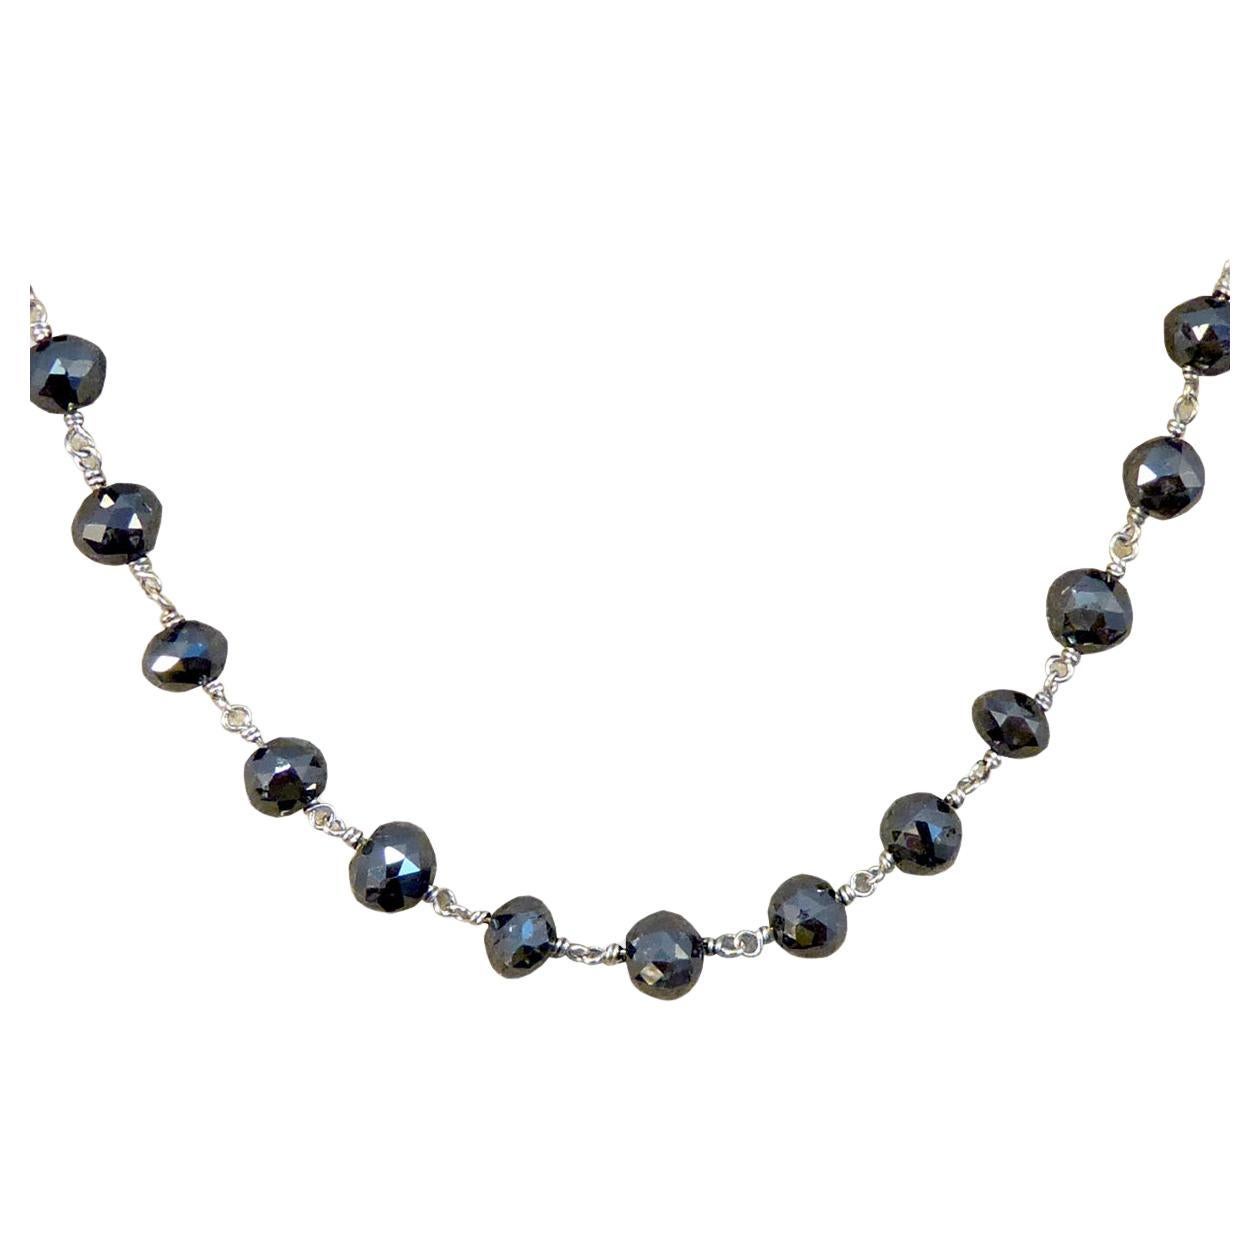 Vintage Black Diamond Long Link Necklace with 18ct White Gold and Diamond Clasp For Sale